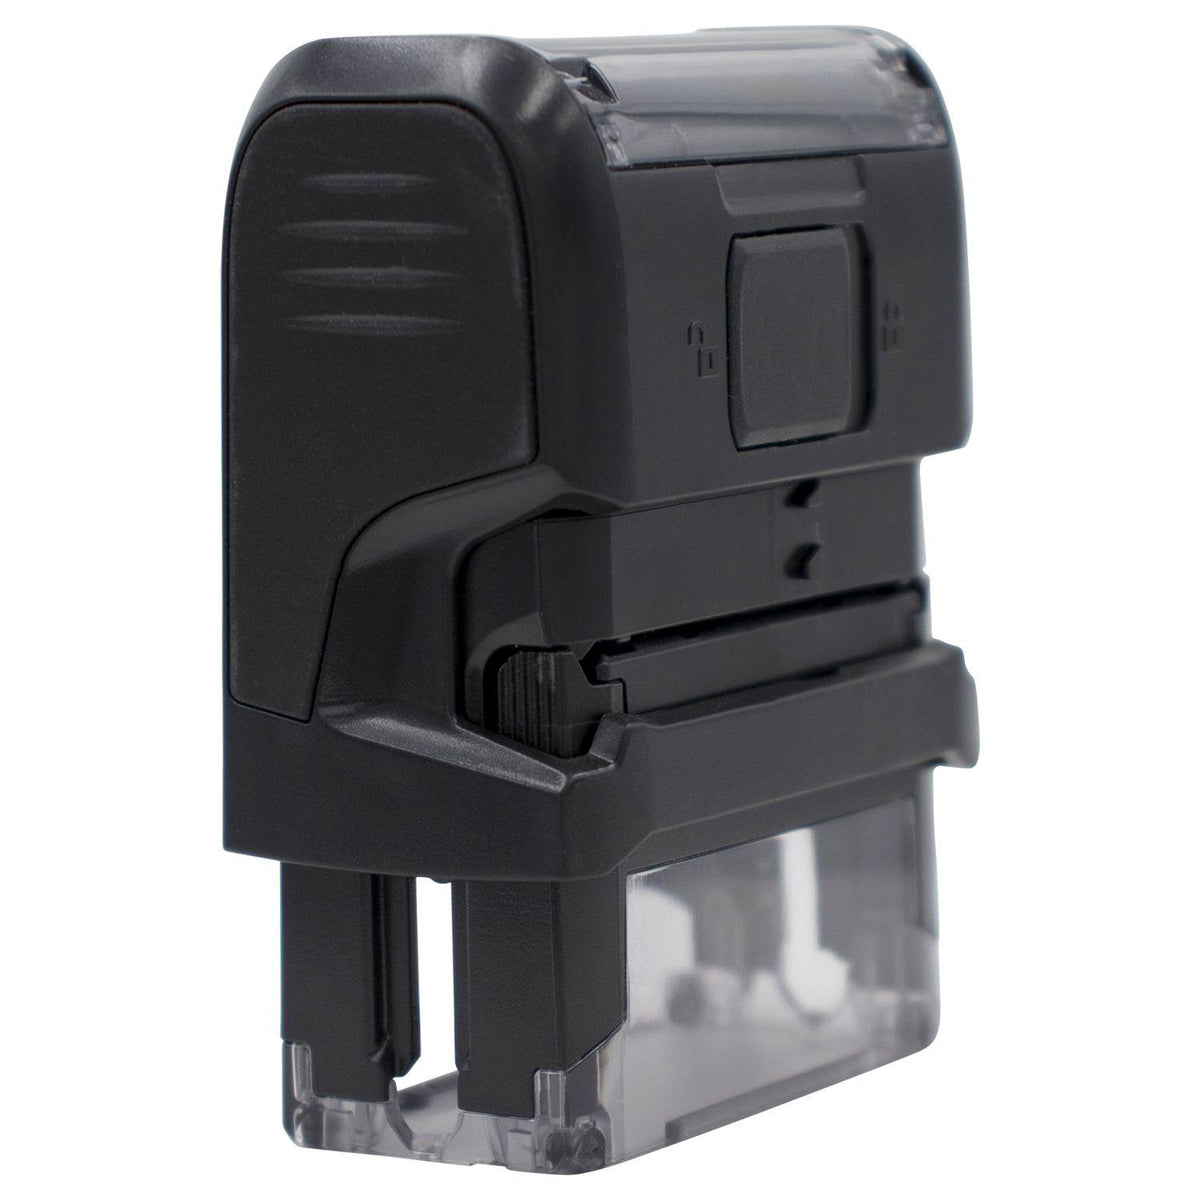 Self Inking Closed Account Stamp - Engineer Seal Stamps - Brand_Trodat, Impression Size_Small, Stamp Type_Self-Inking Stamp, Type of Use_Business, Type of Use_Finance